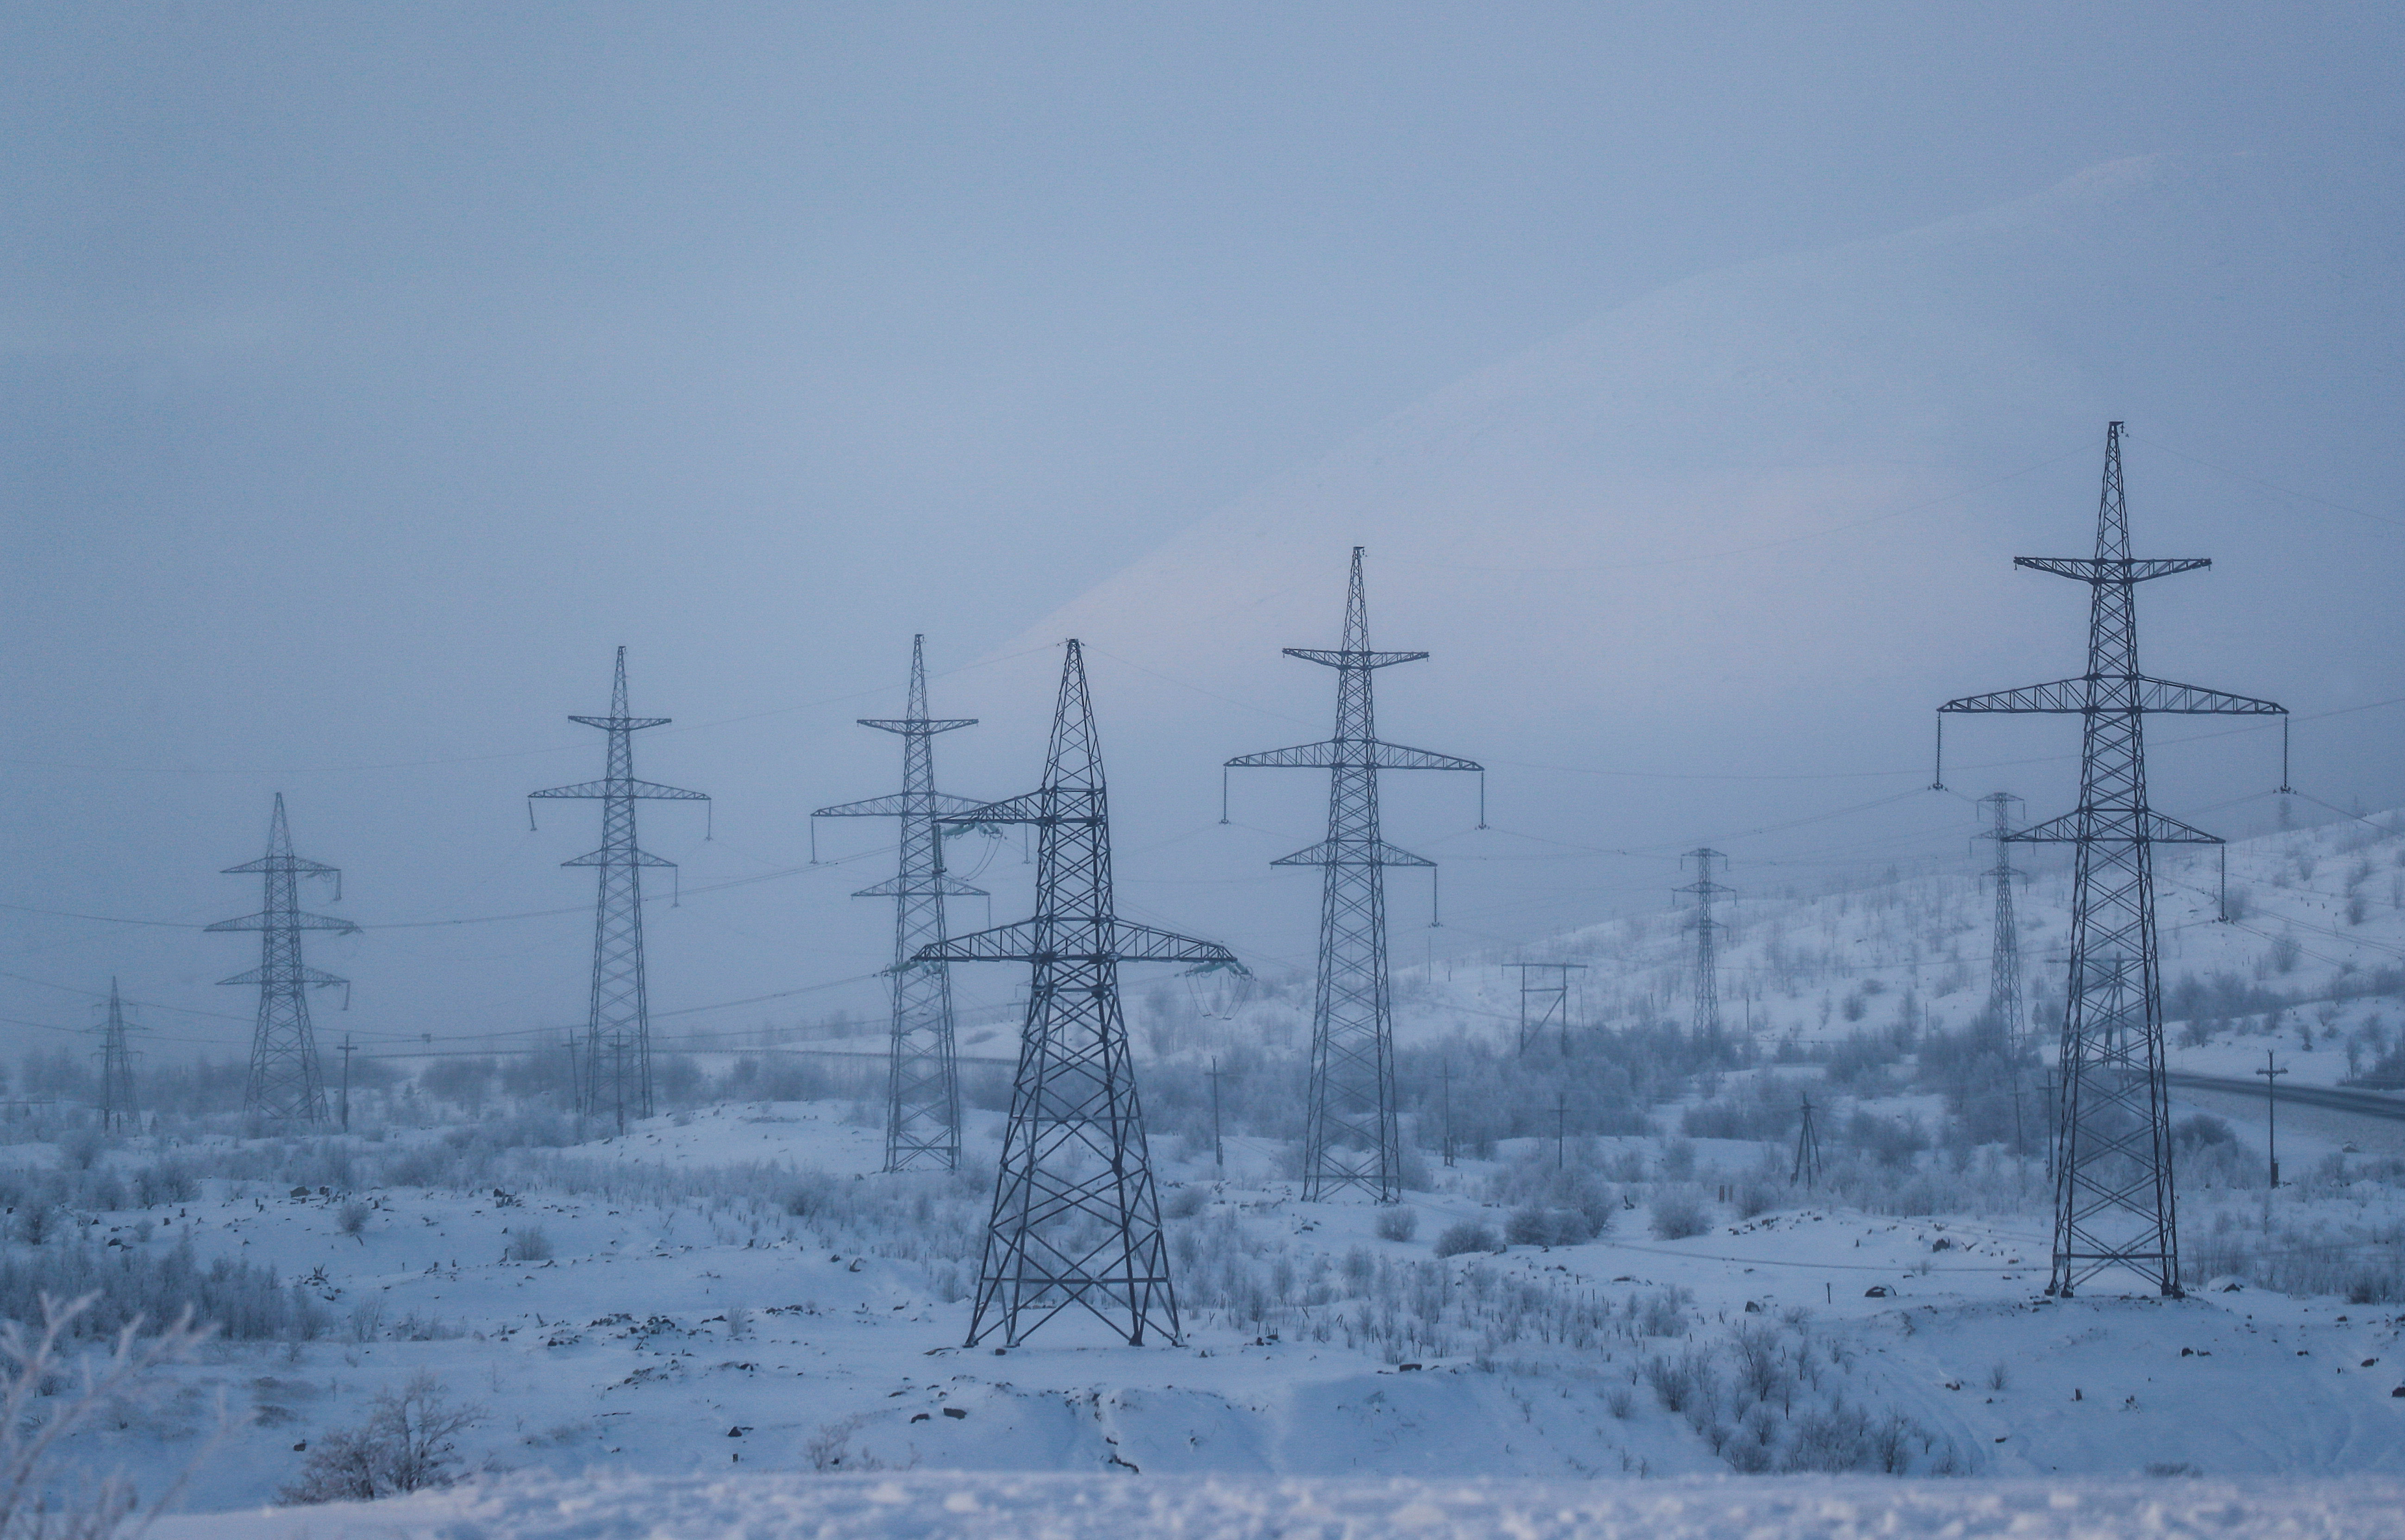 Power transmission lines are seen on a frosty day outside the town of Monchegorsk in Murmansk region